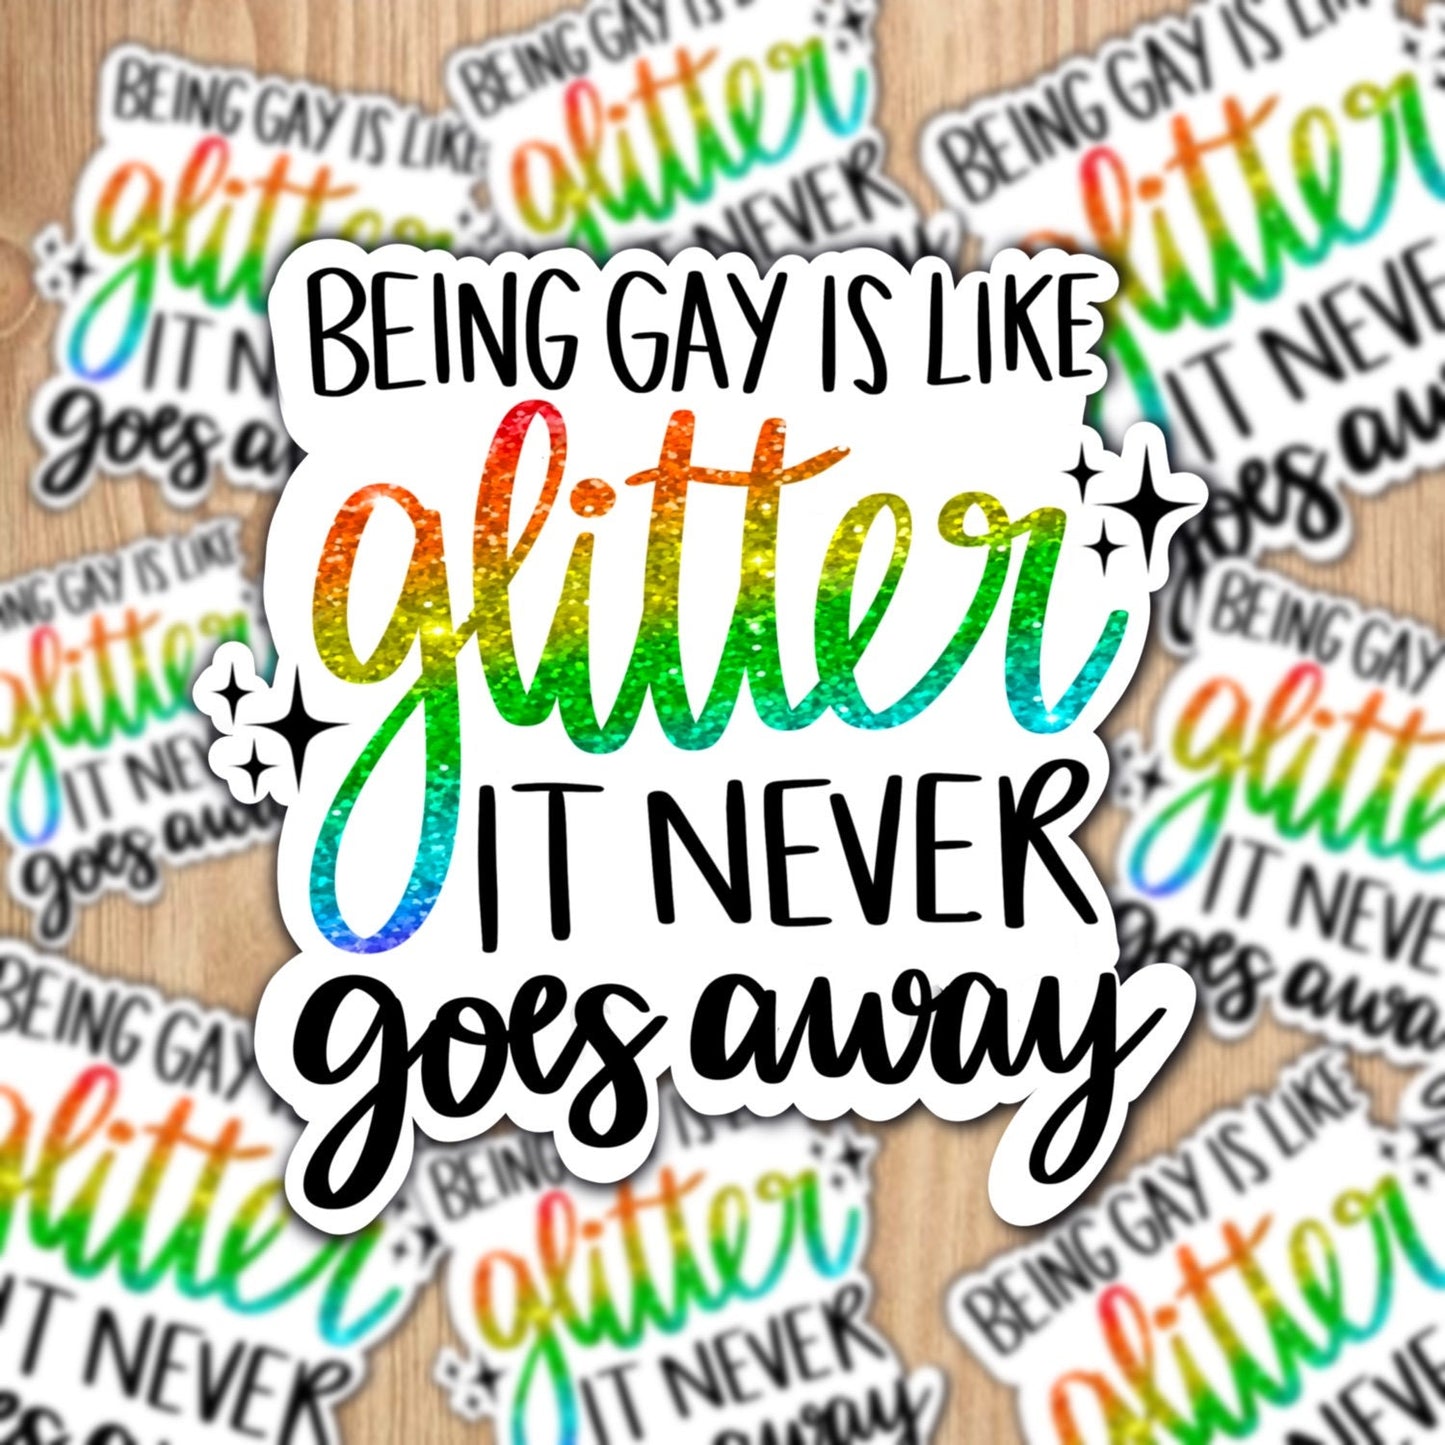 Being Gay doesn't go away sticker